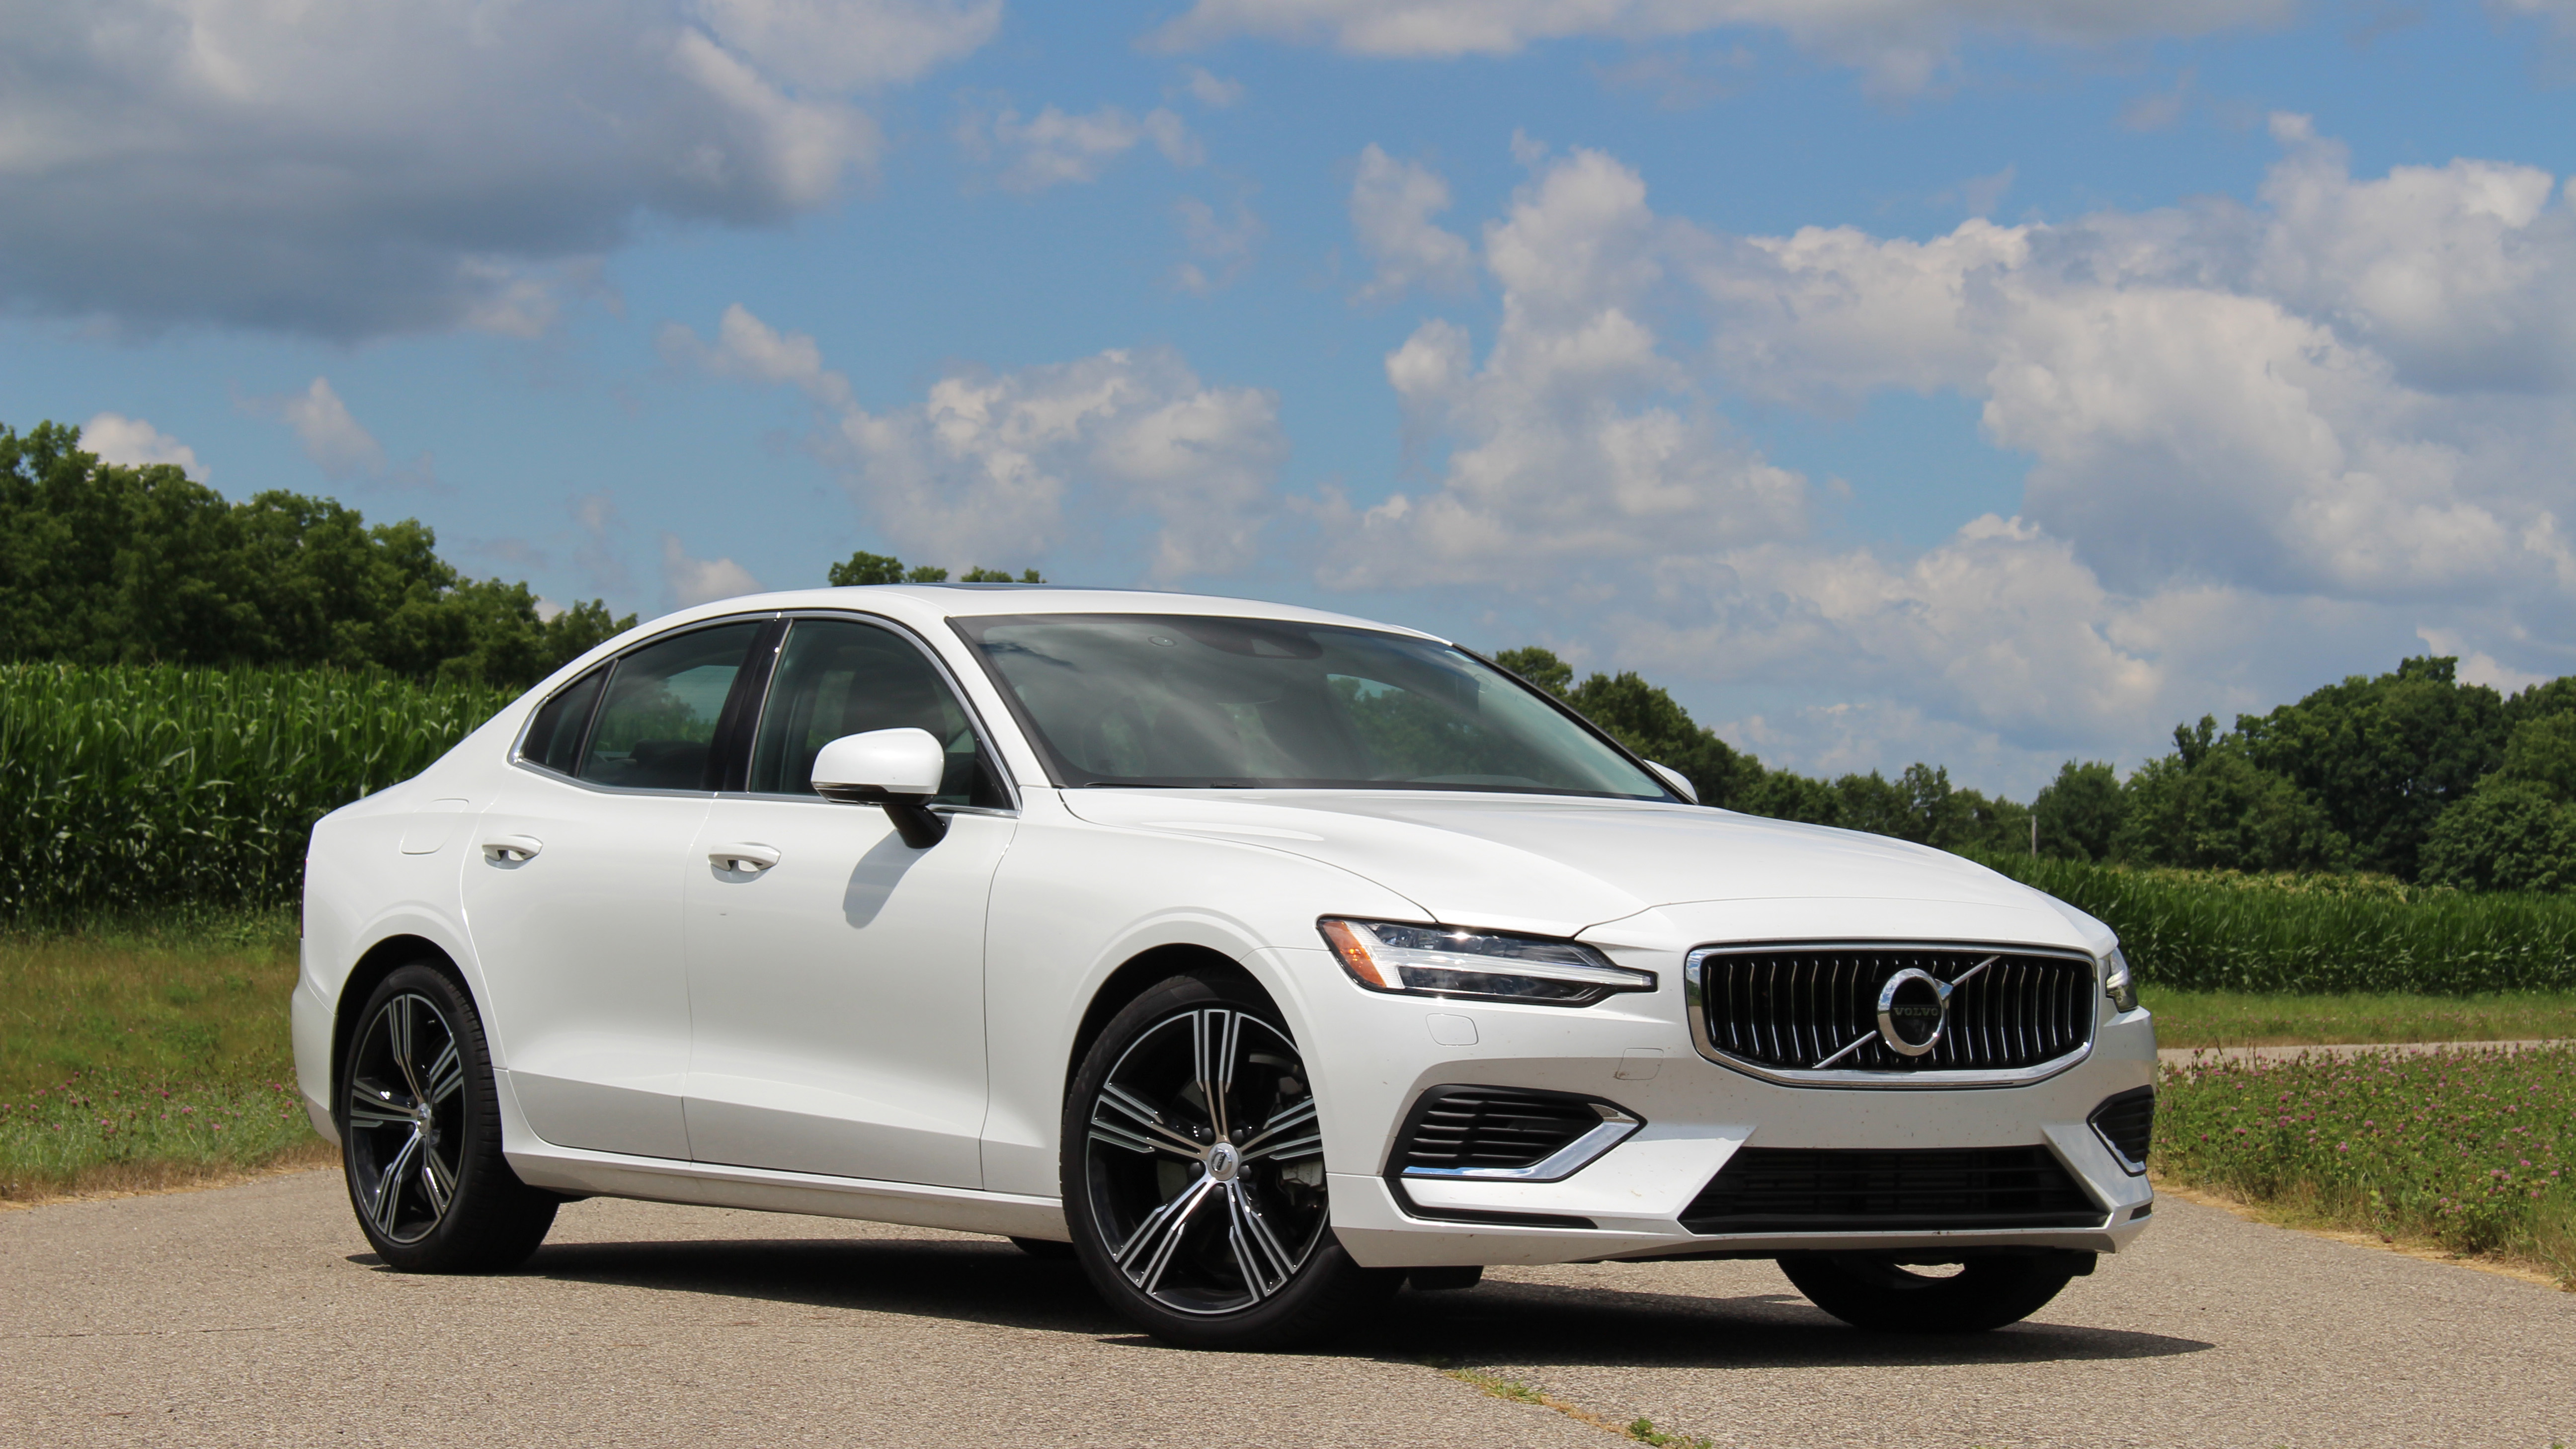 2020 Volvo S60 T8 Long-Term Update | We cross the 10,000-mile mark